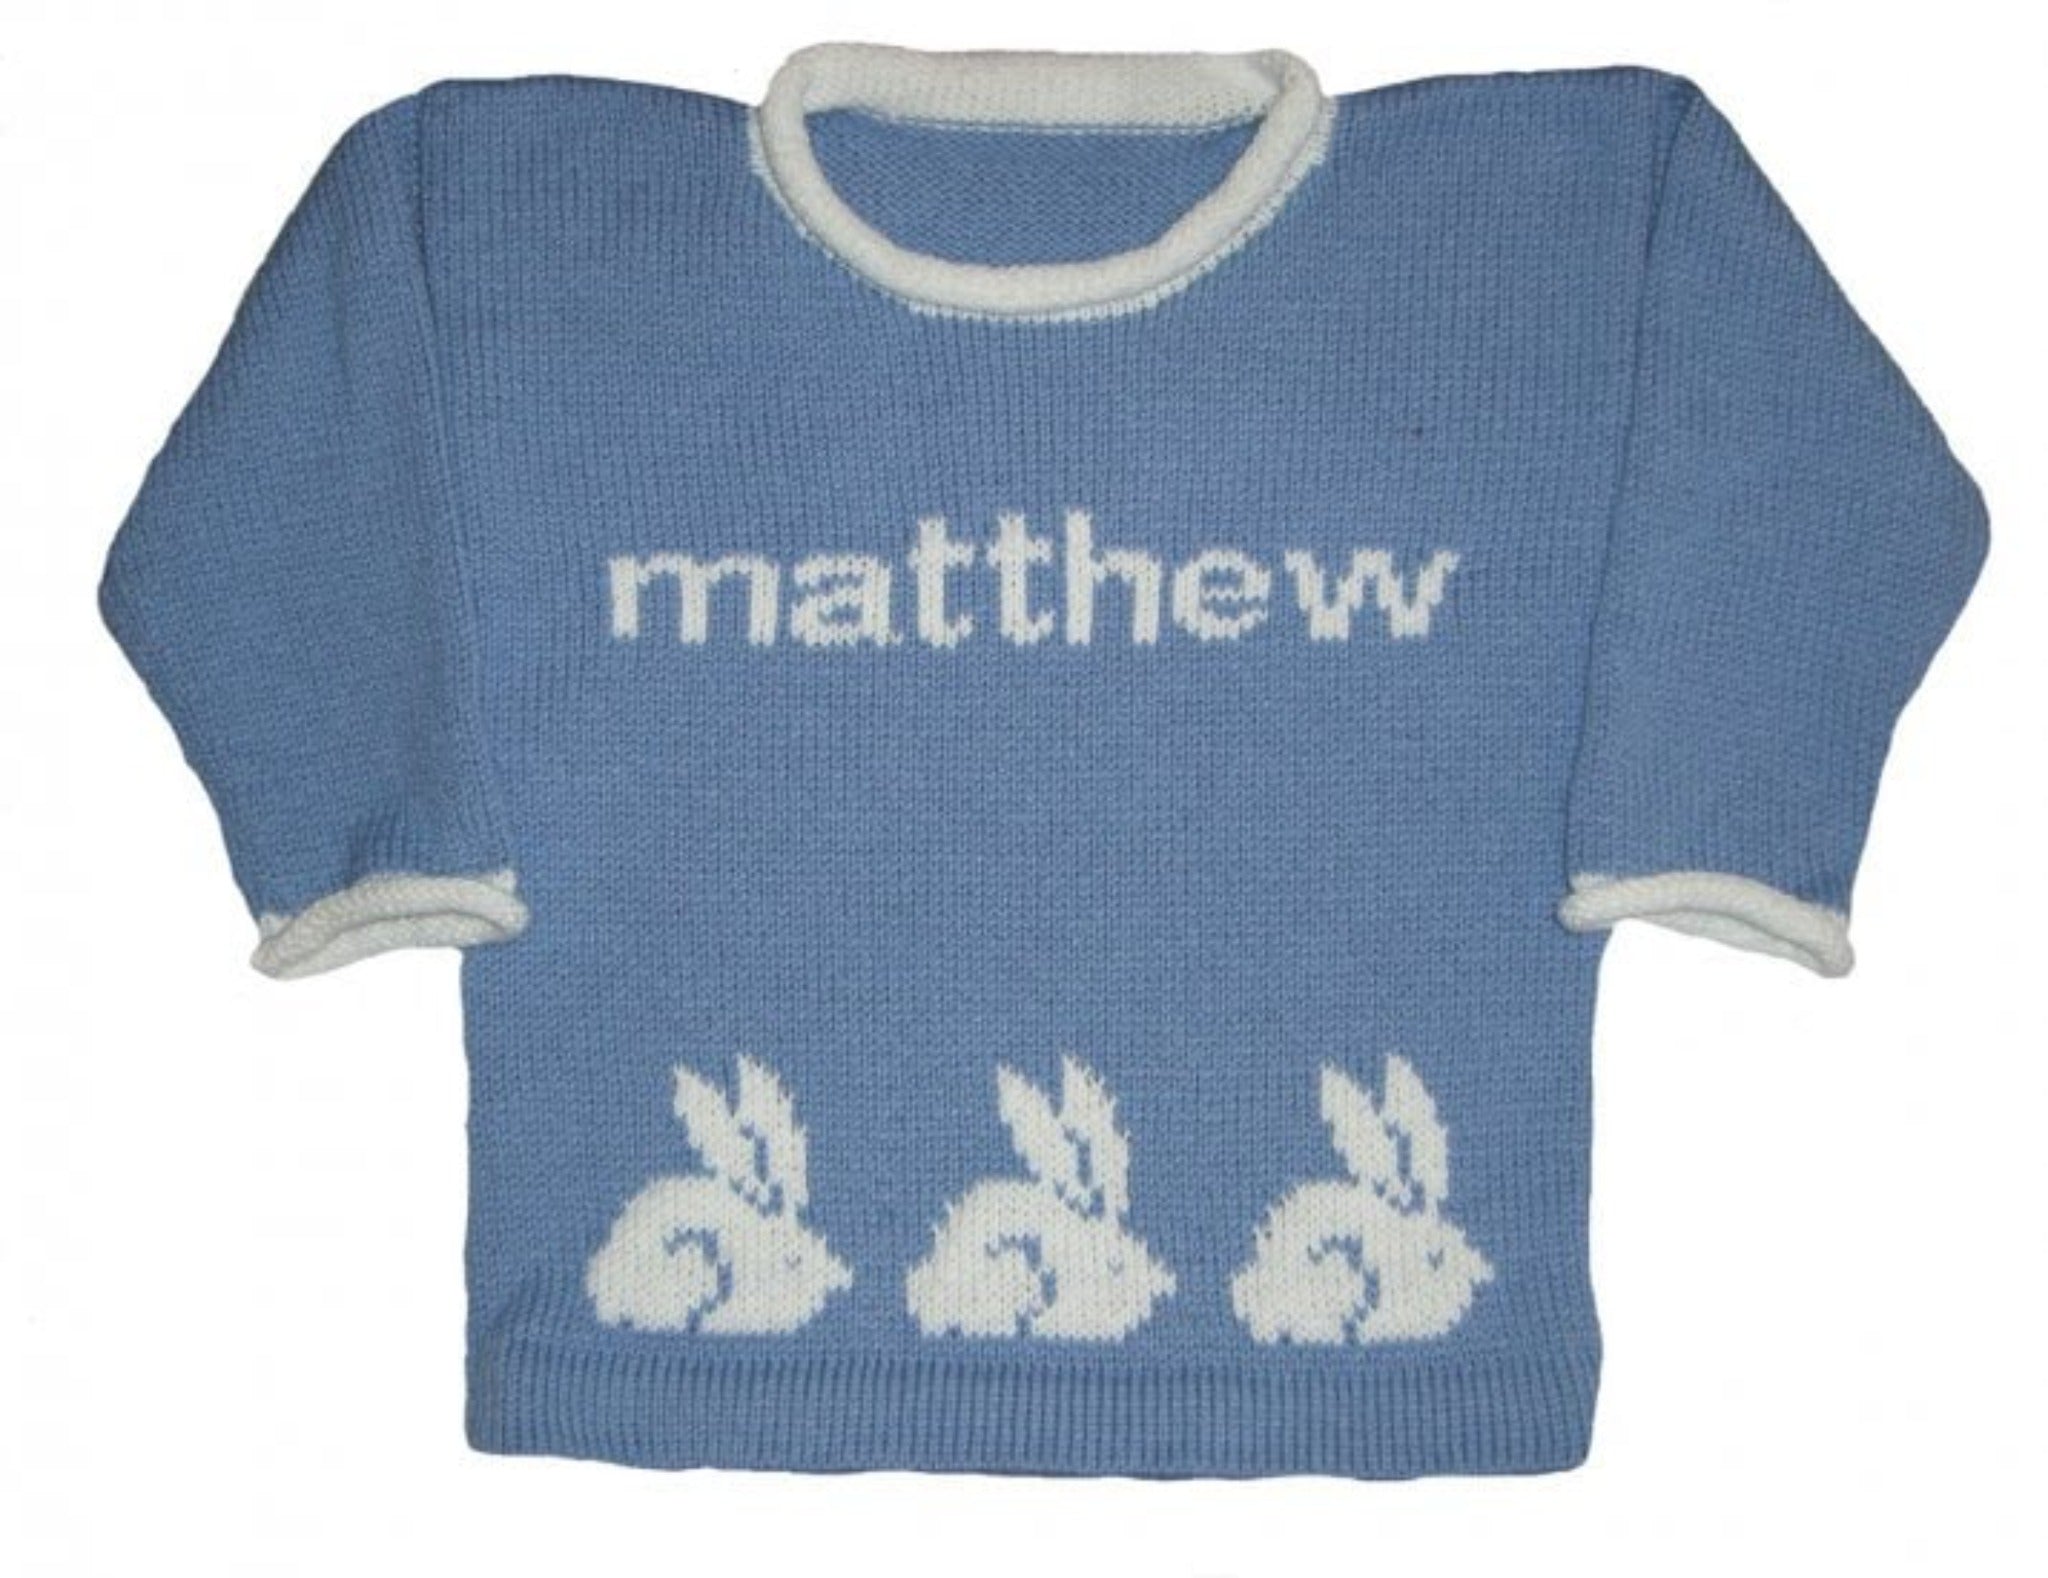 Personalized Easter Sweater with Bunnys - Custom Knits for Baby